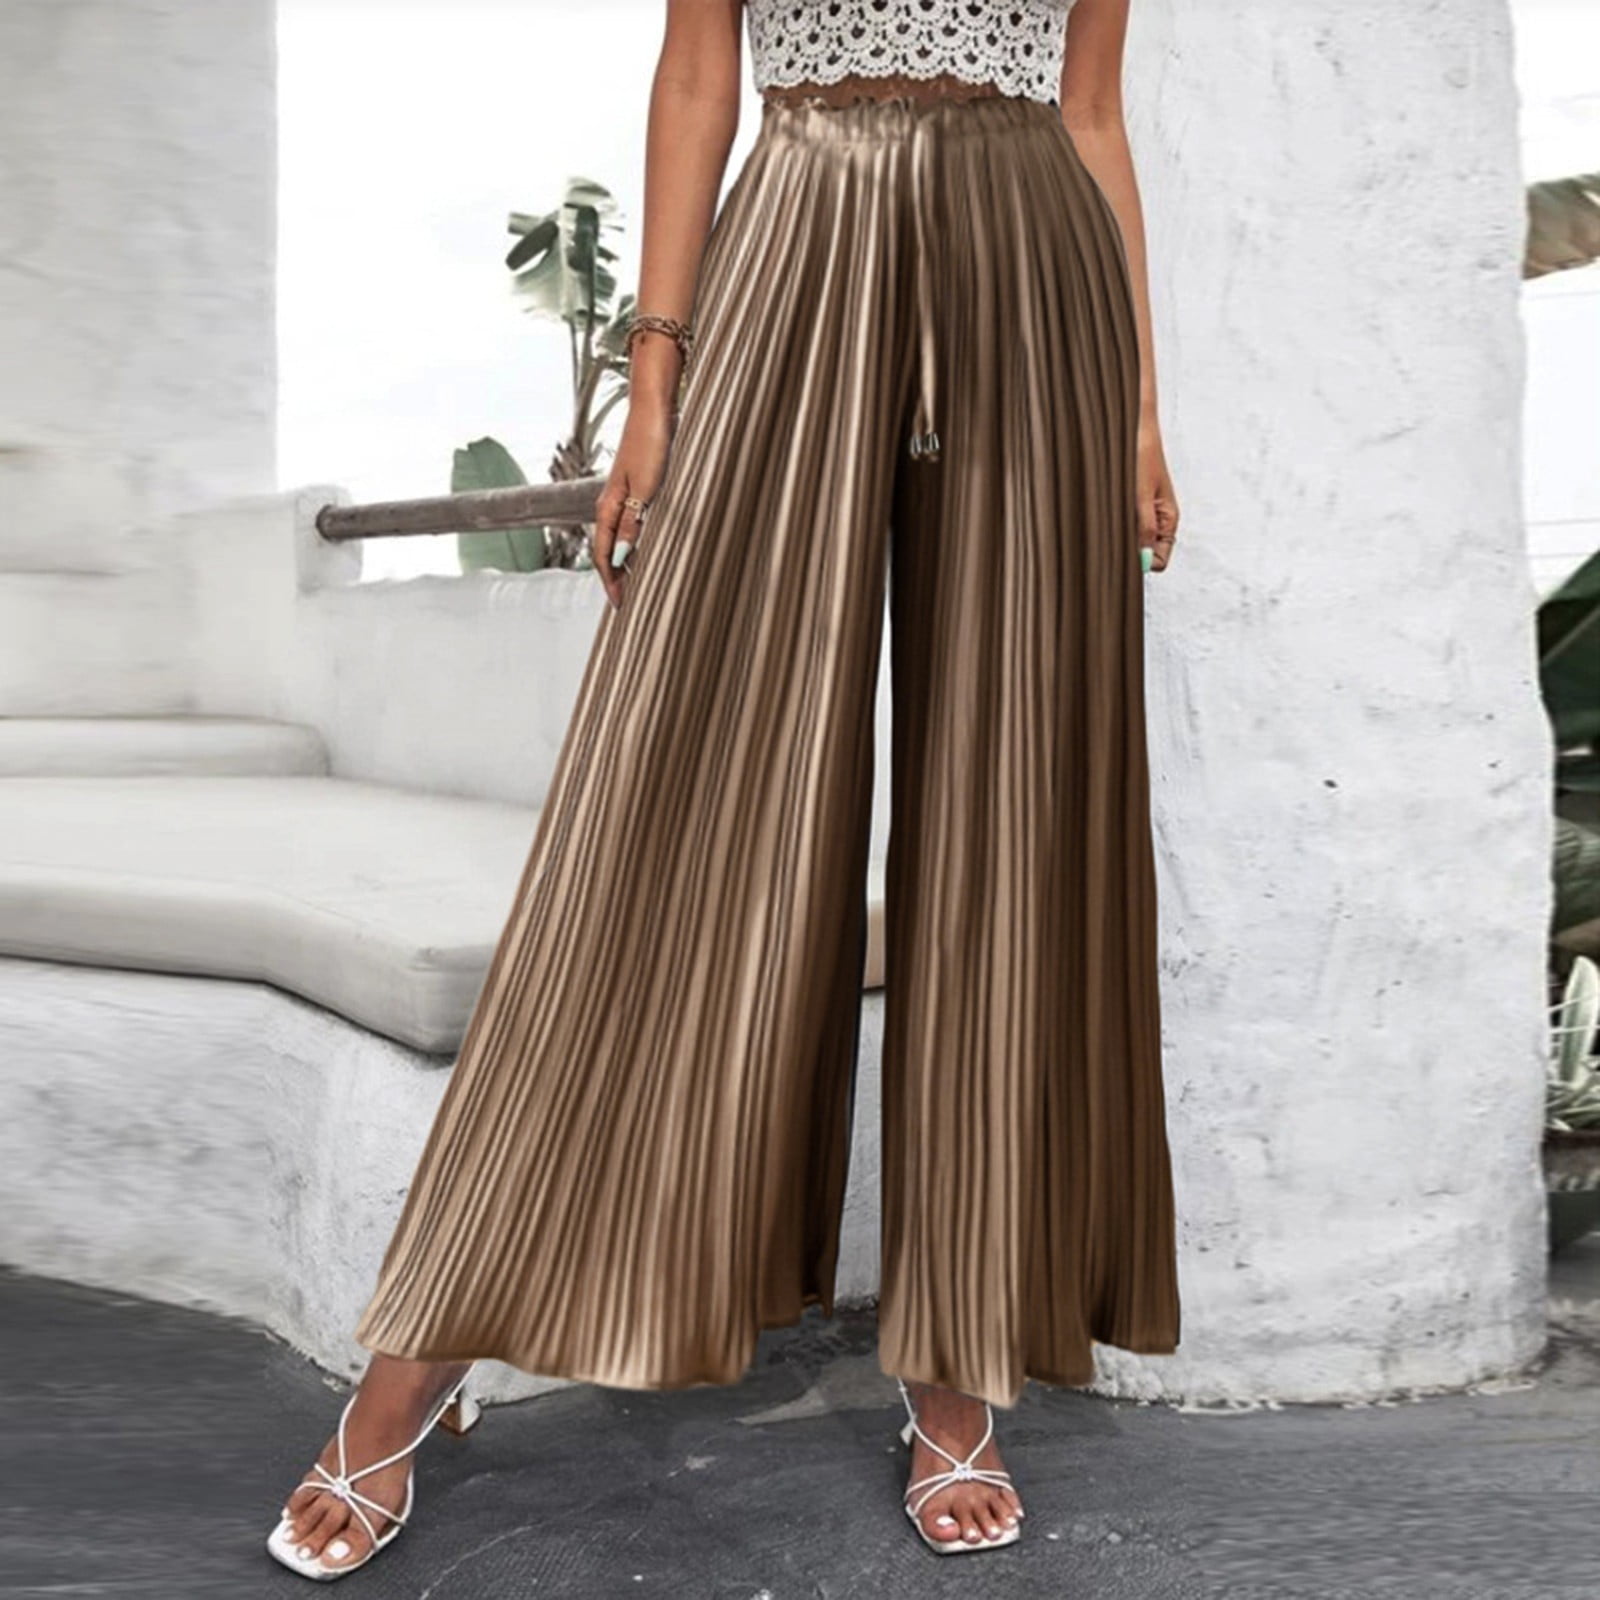 nsendm Womens Wide Leg Palazzo Pants High Waisted Pant Smocked Pleated  Loose Fit Casual Petite Pants for Women Work Casual Pants Khaki Medium 